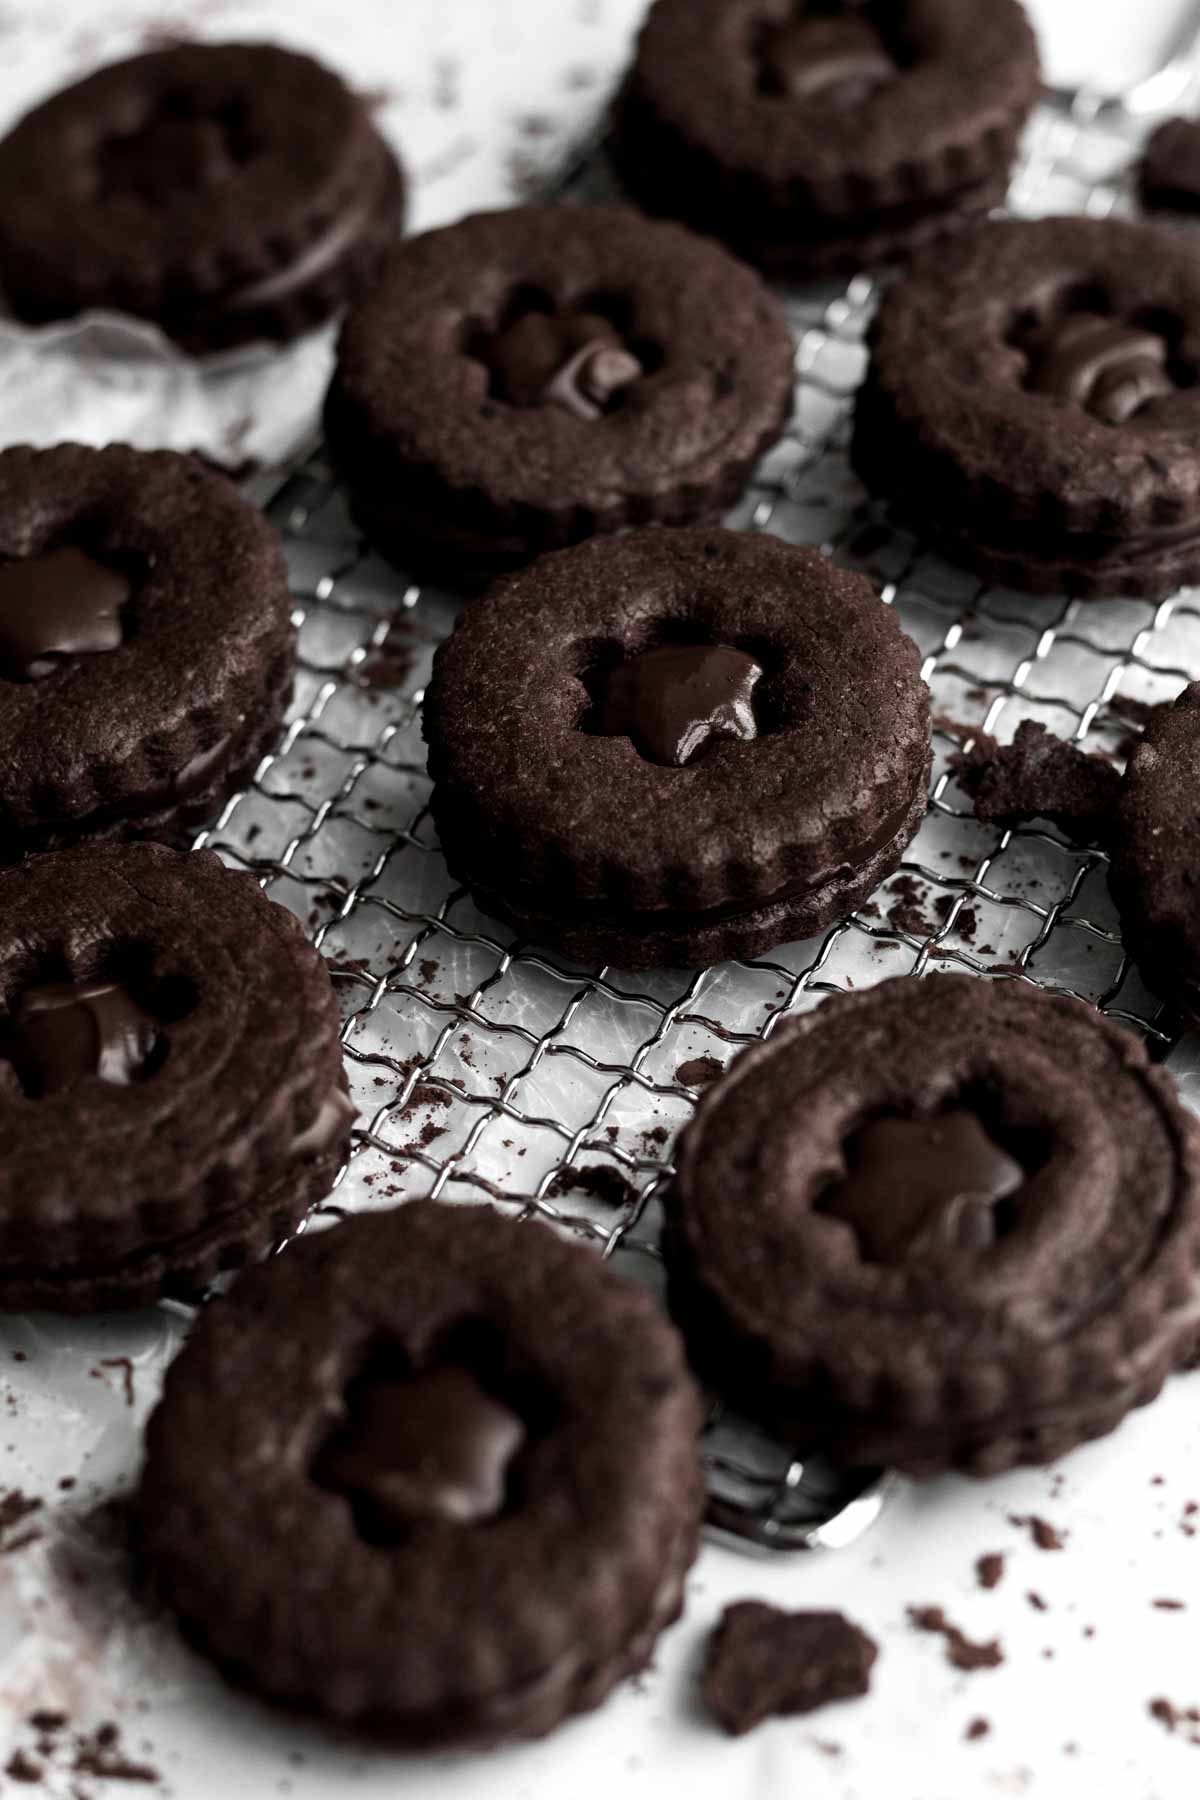 Several Double Chocolate Sandwich Cookies on a baking tray.